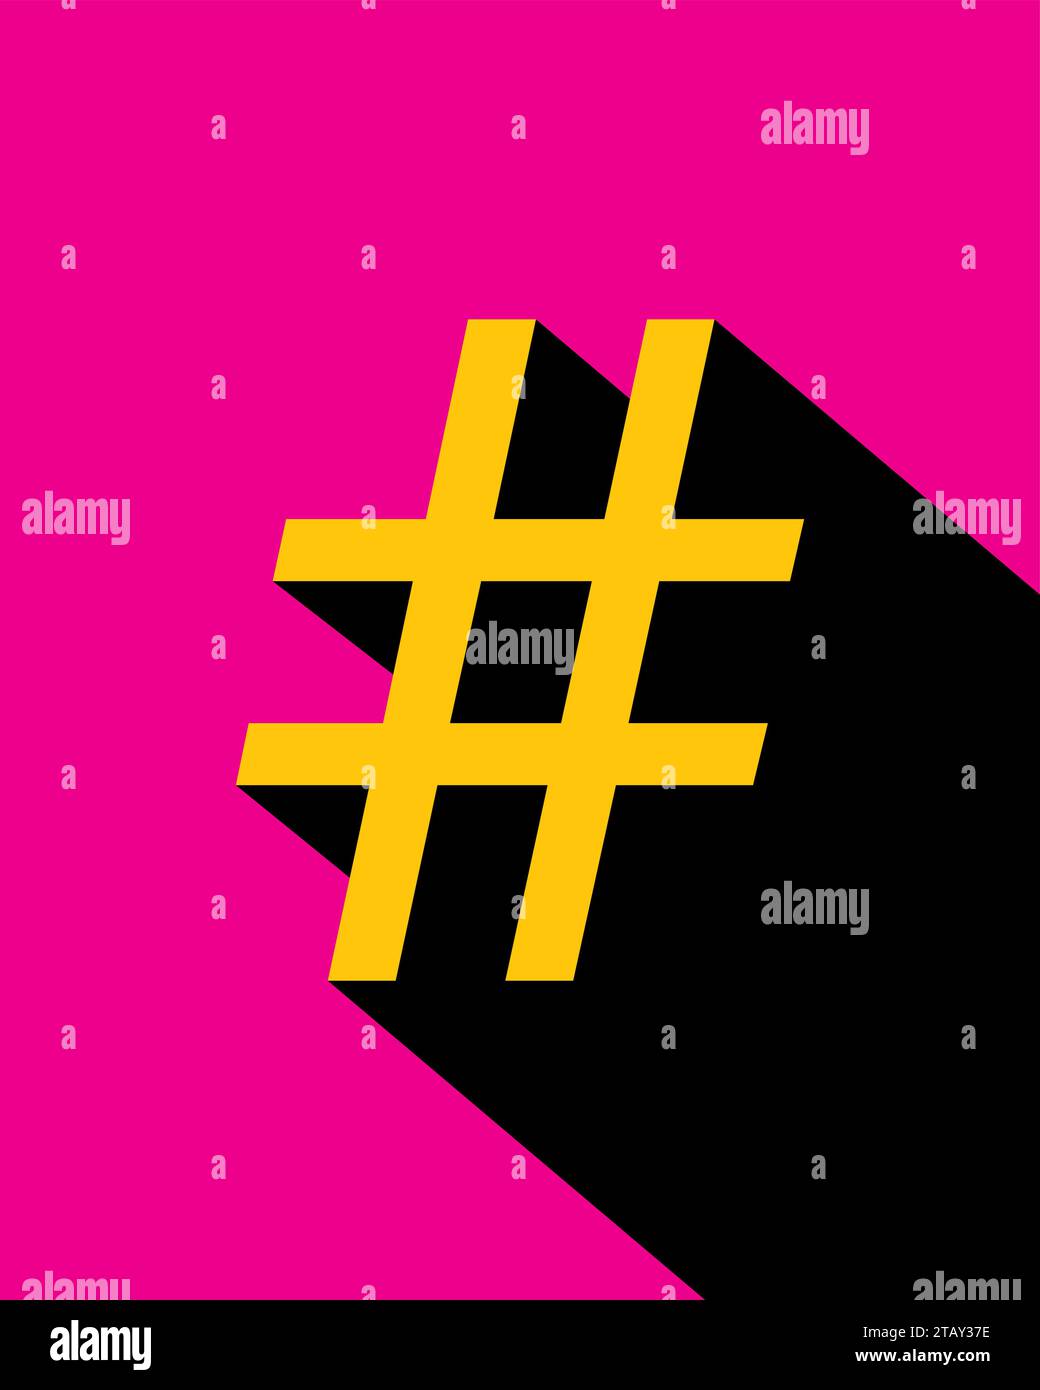 hashtag logo icon with shadow isolated on pink background Stock Vector